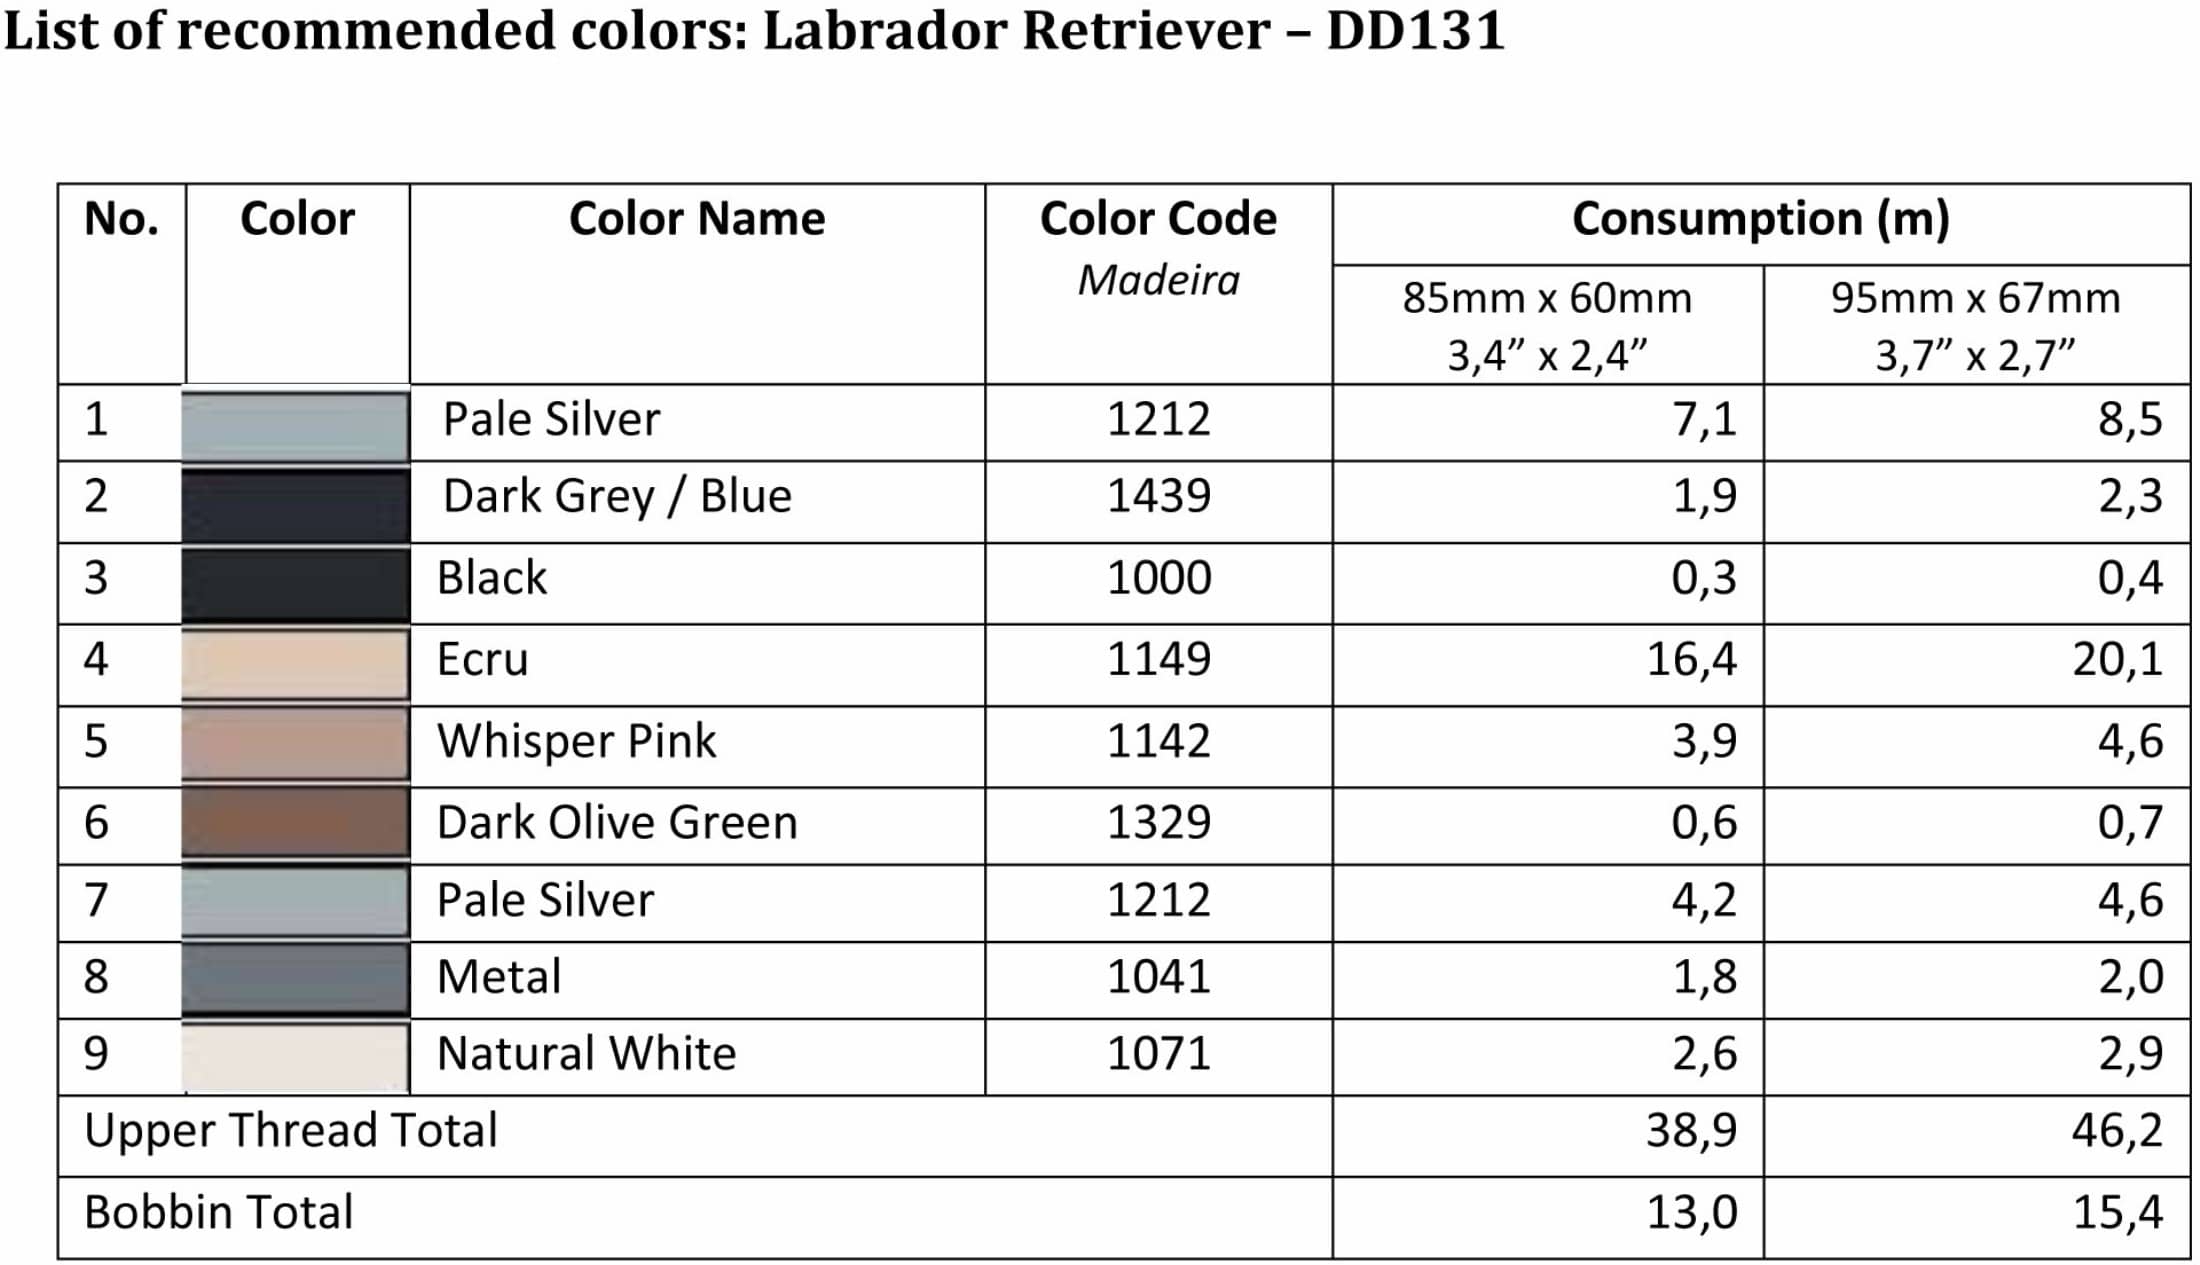 List of recommended colors - DD131